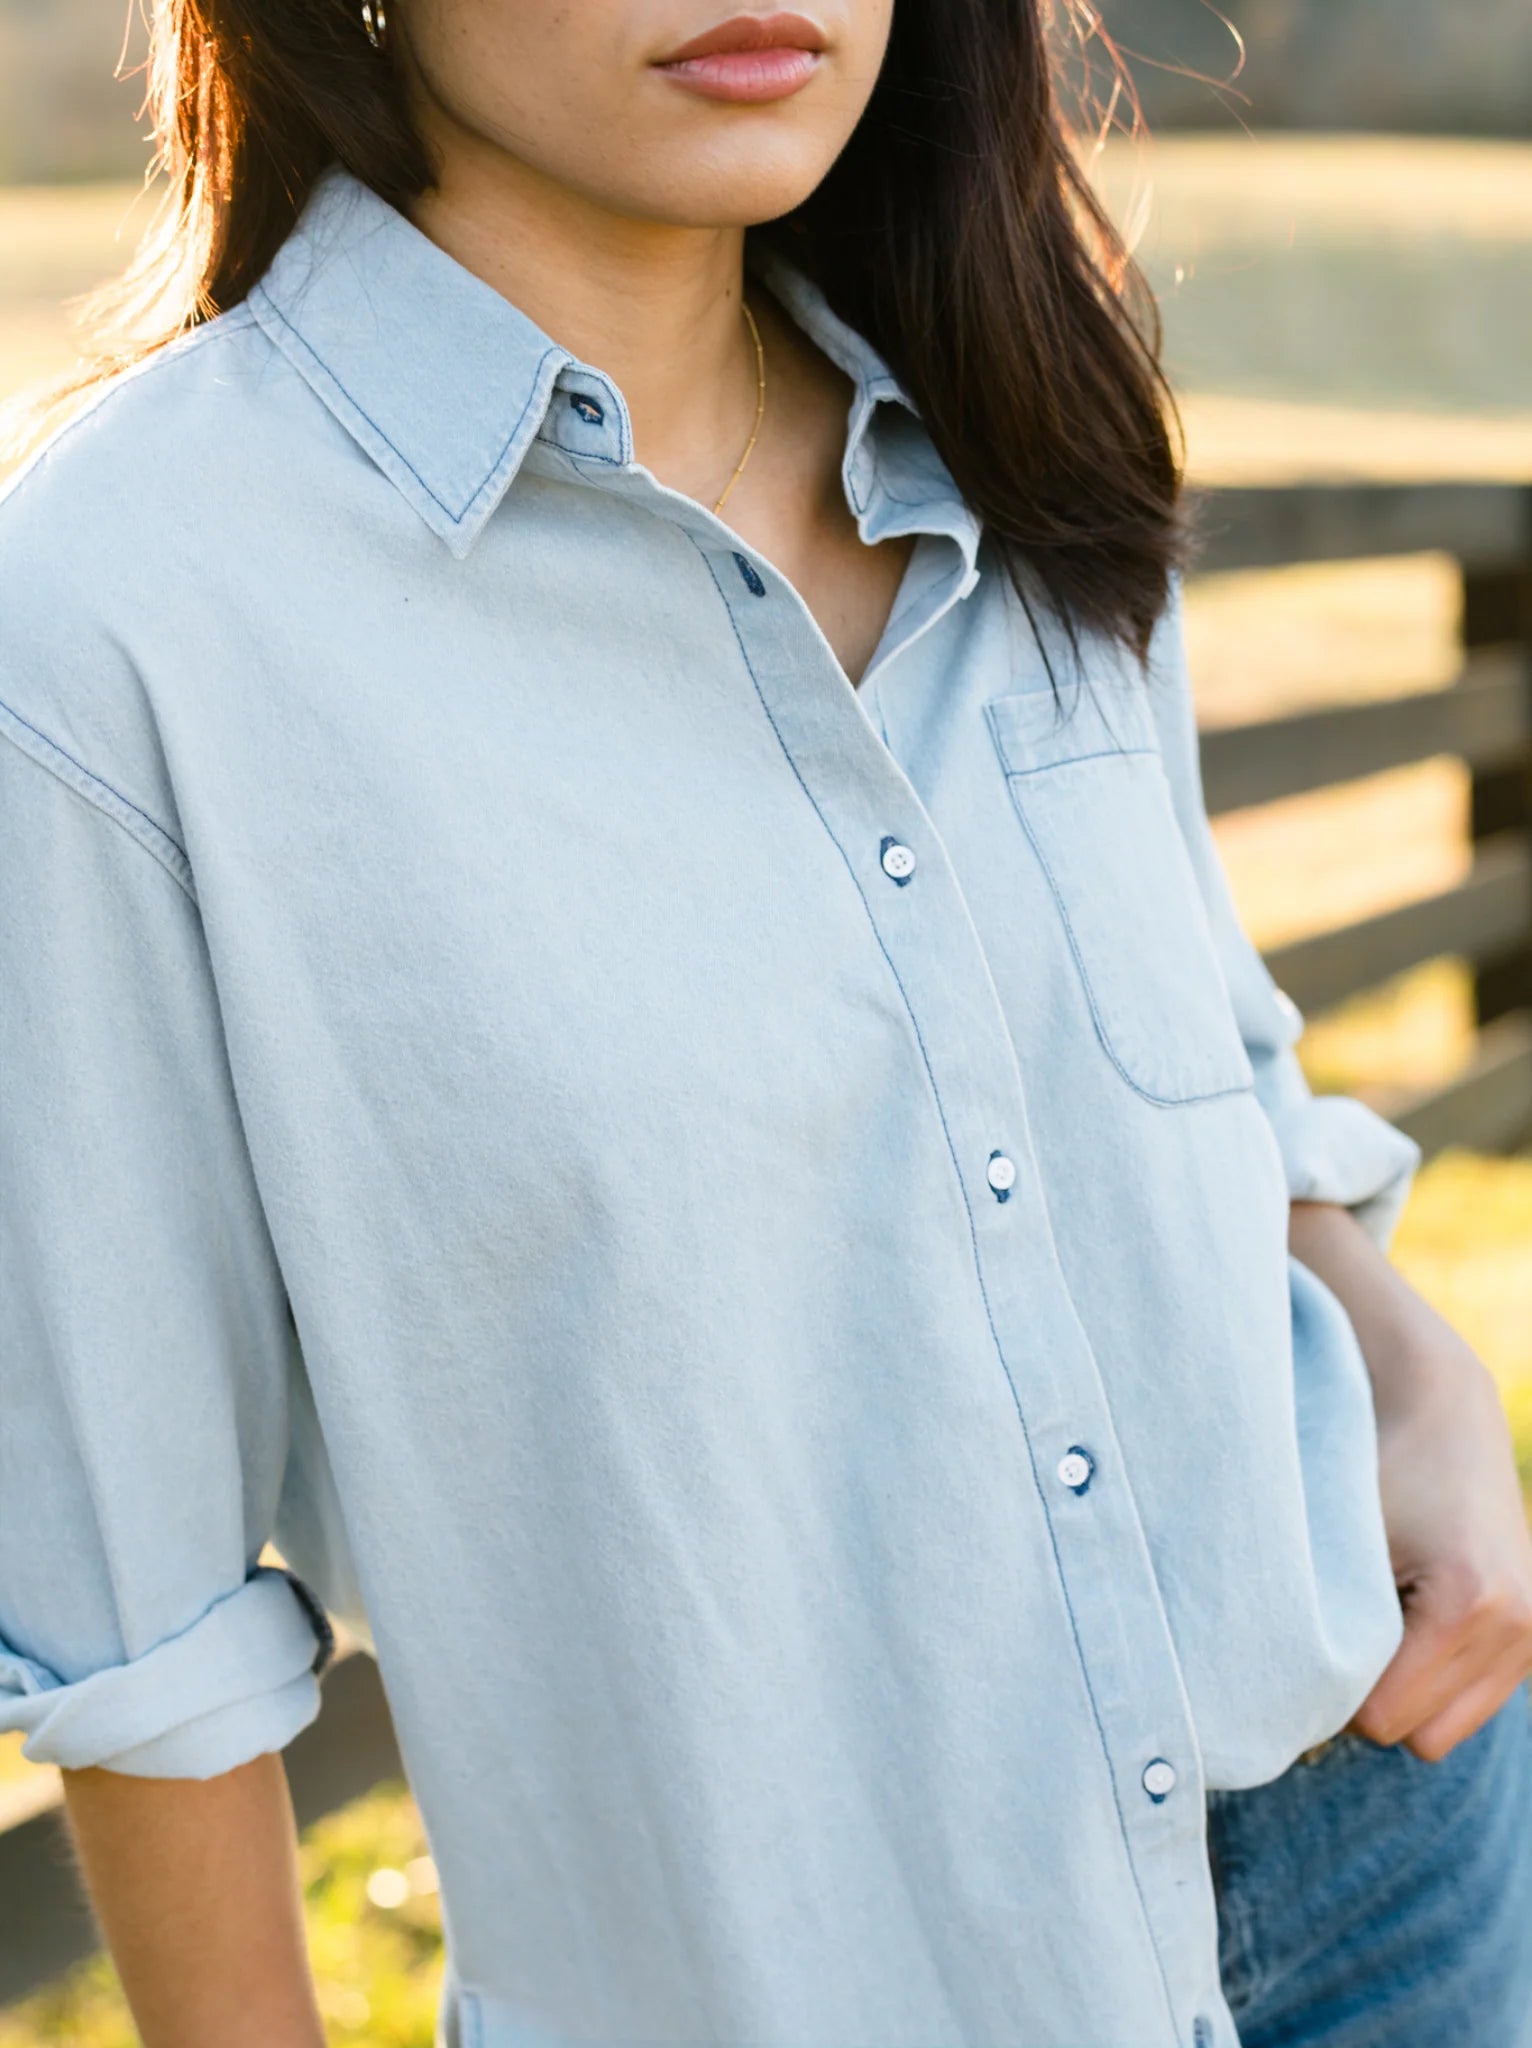 'Cropped image of a woman in a blue denim shirt, partial face visible.'